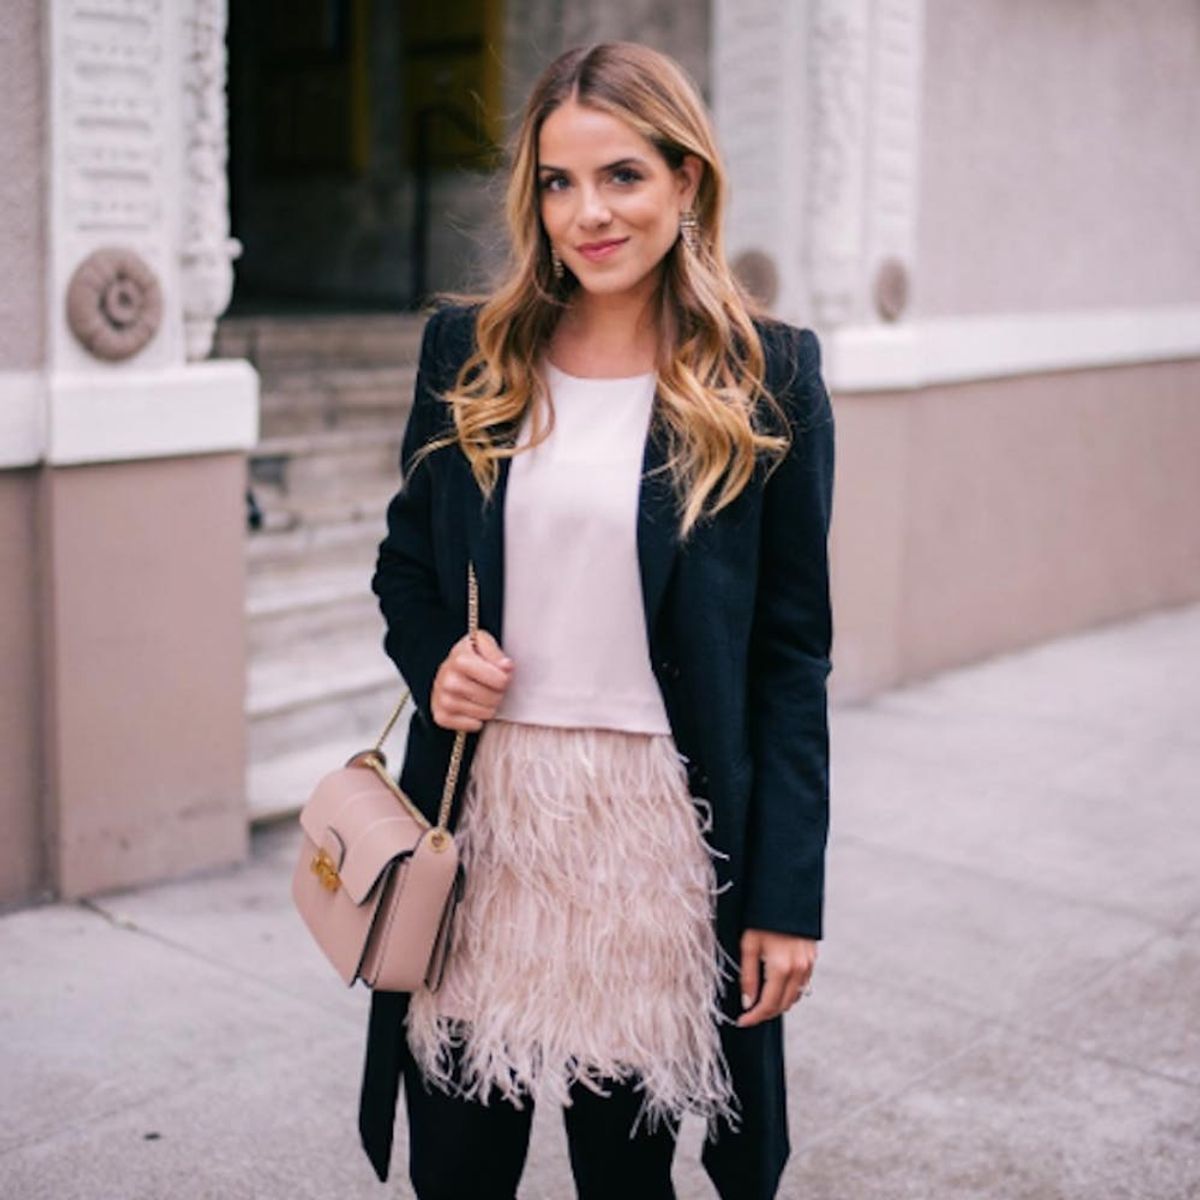 13 Street Style-Approved Holiday Outfits for Every Occasion